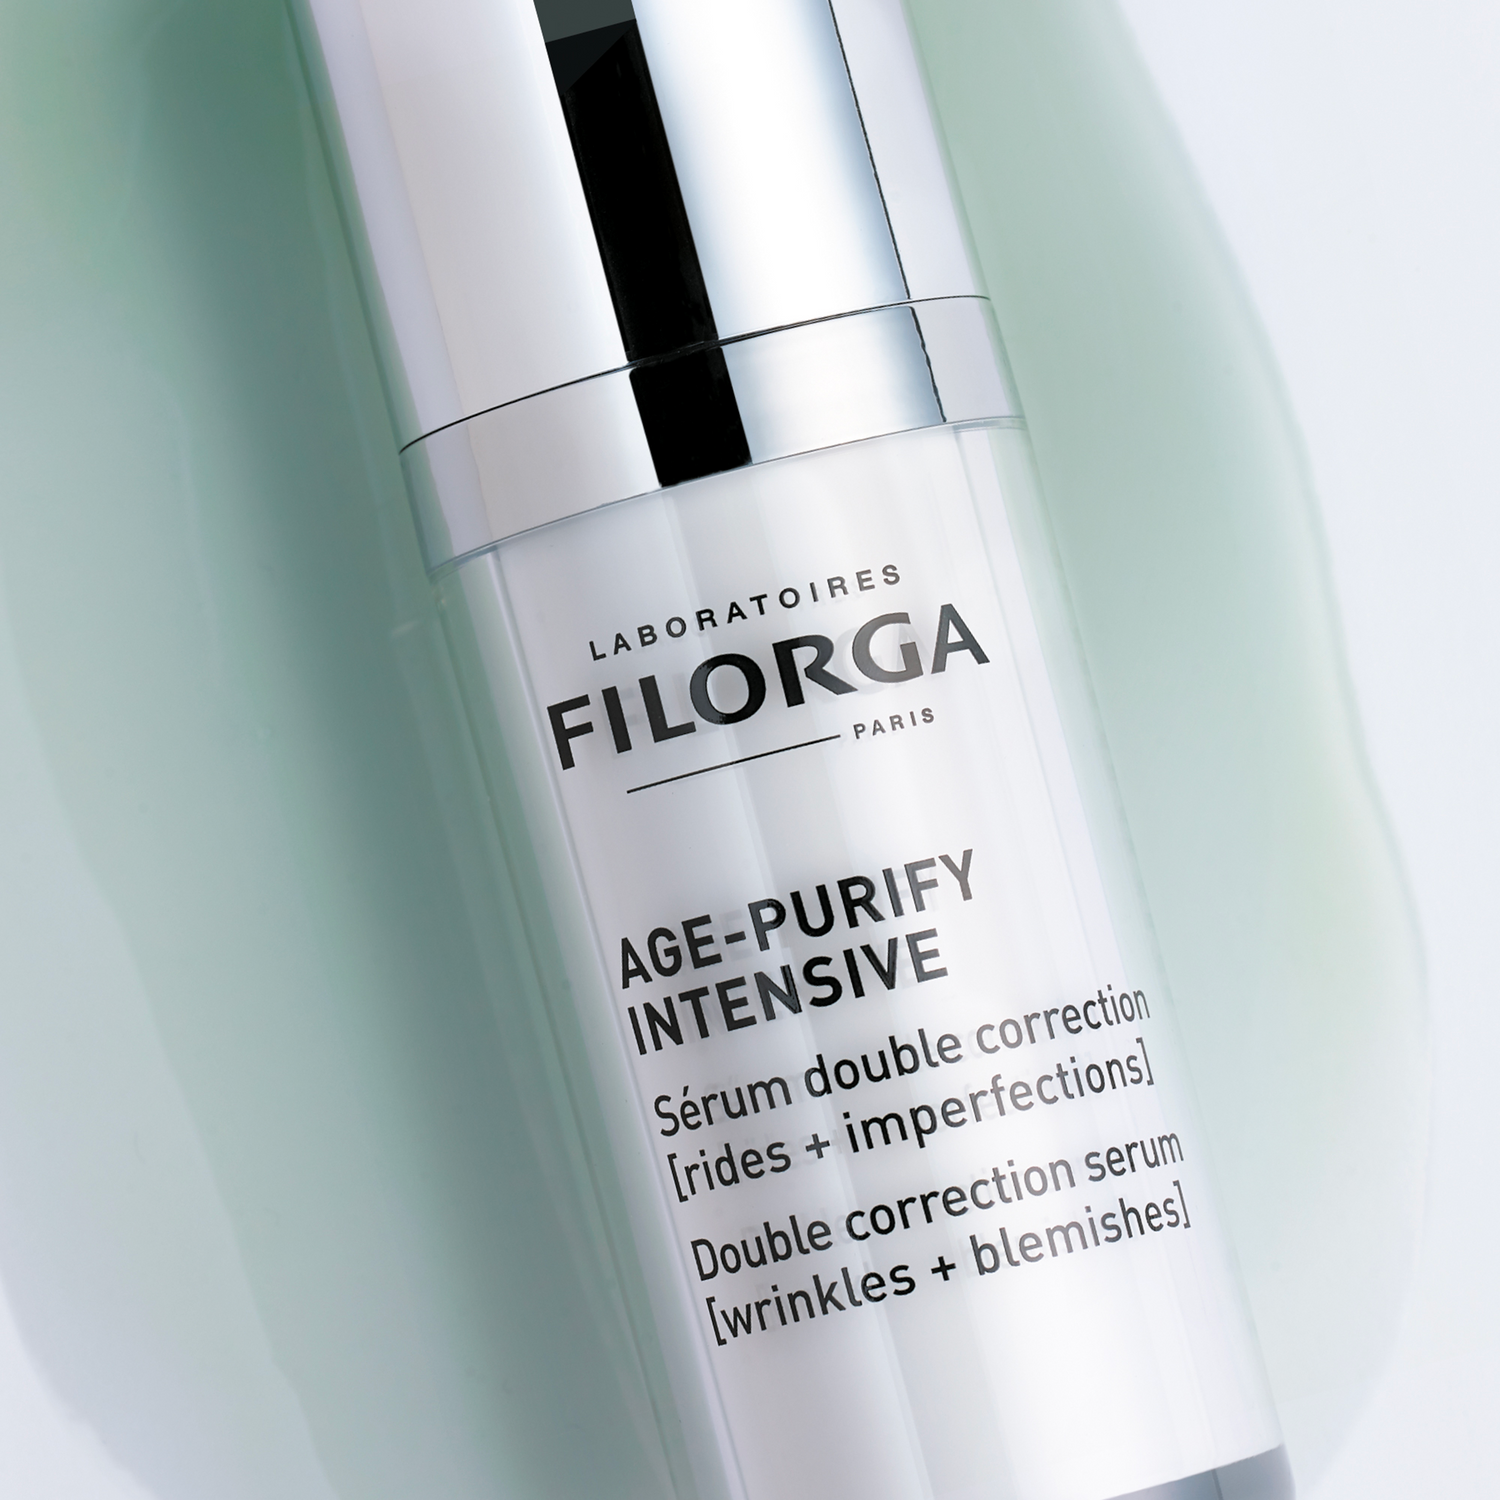 FILROGA AGE-PURIFY INTENSIVE closed bottle on greet texture background